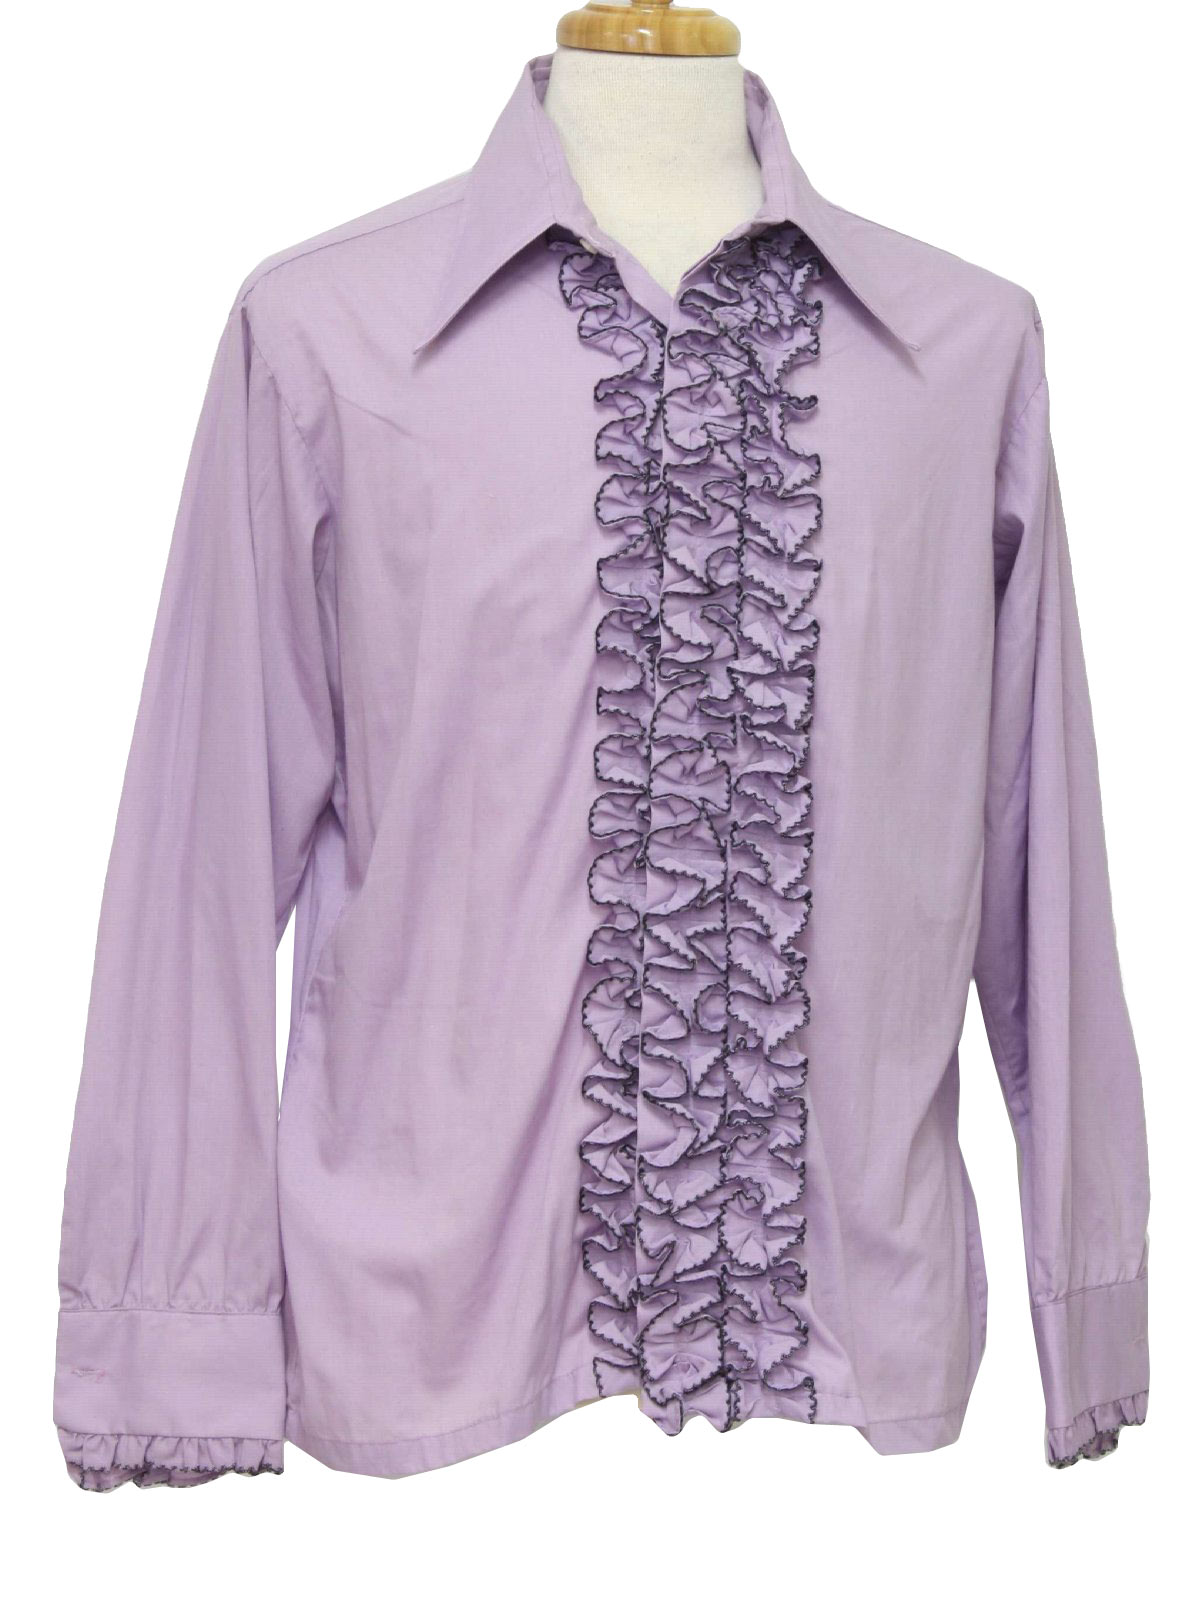 Retro Seventies Shirt: 70s -LM Fashions- Mens purple polyester and ...